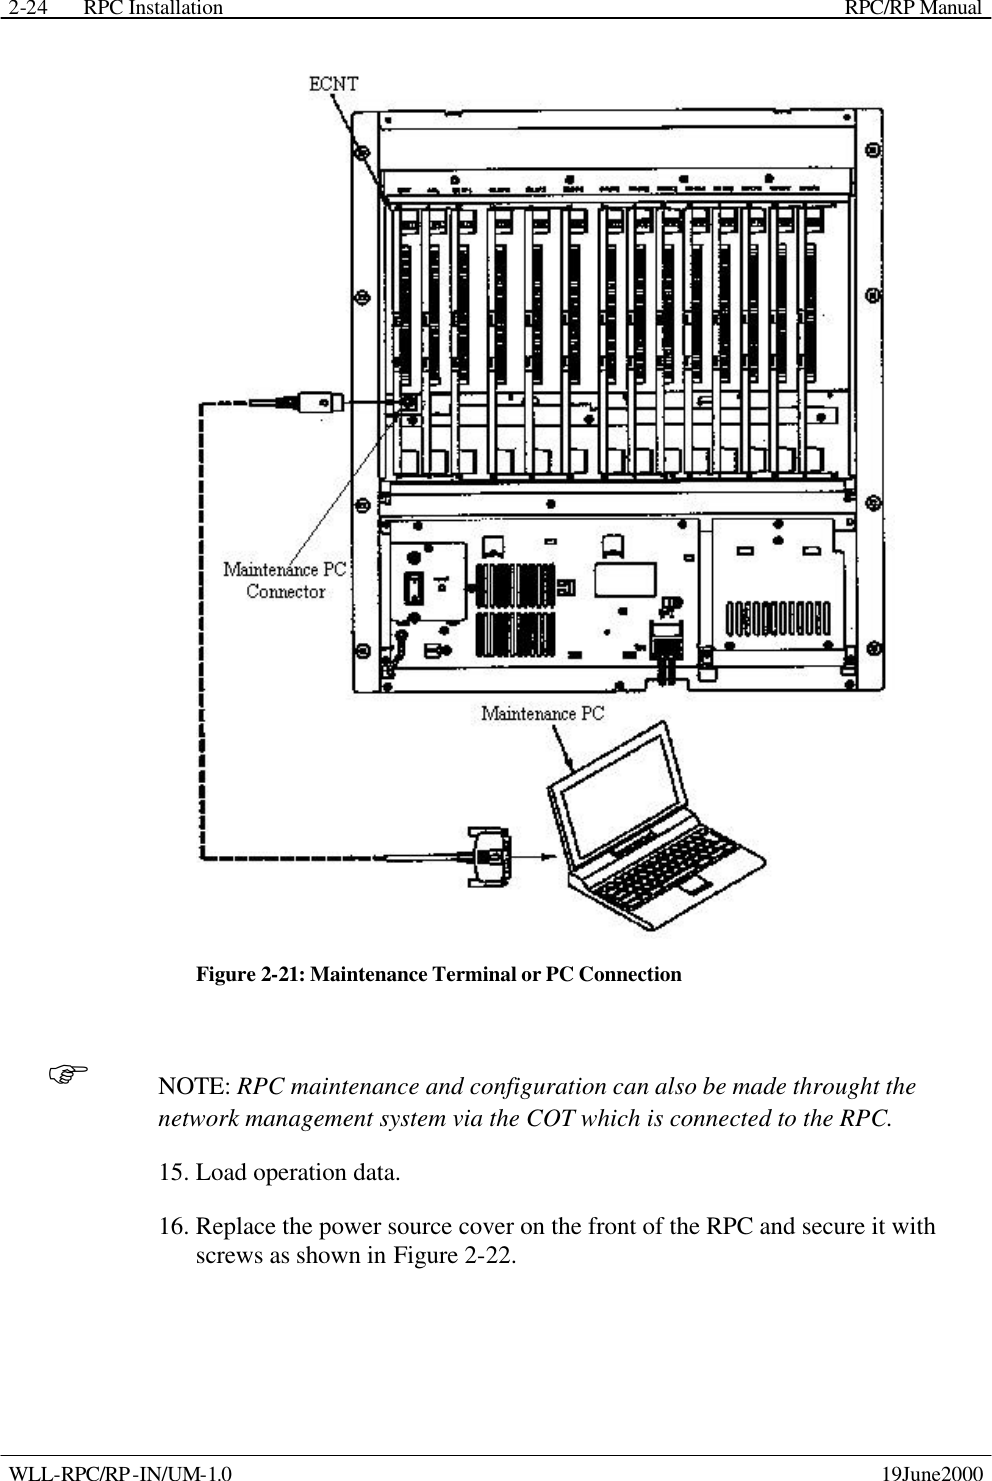 RPC Installation    RPC/RP Manual WLL-RPC/RP-IN/UM-1.0    19June2000 2-24 Figure 2-21: Maintenance Terminal or PC Connection F NOTE: RPC maintenance and configuration can also be made throught the network management system via the COT which is connected to the RPC. 15. Load operation data. 16. Replace the power source cover on the front of the RPC and secure it with screws as shown in Figure 2-22. 